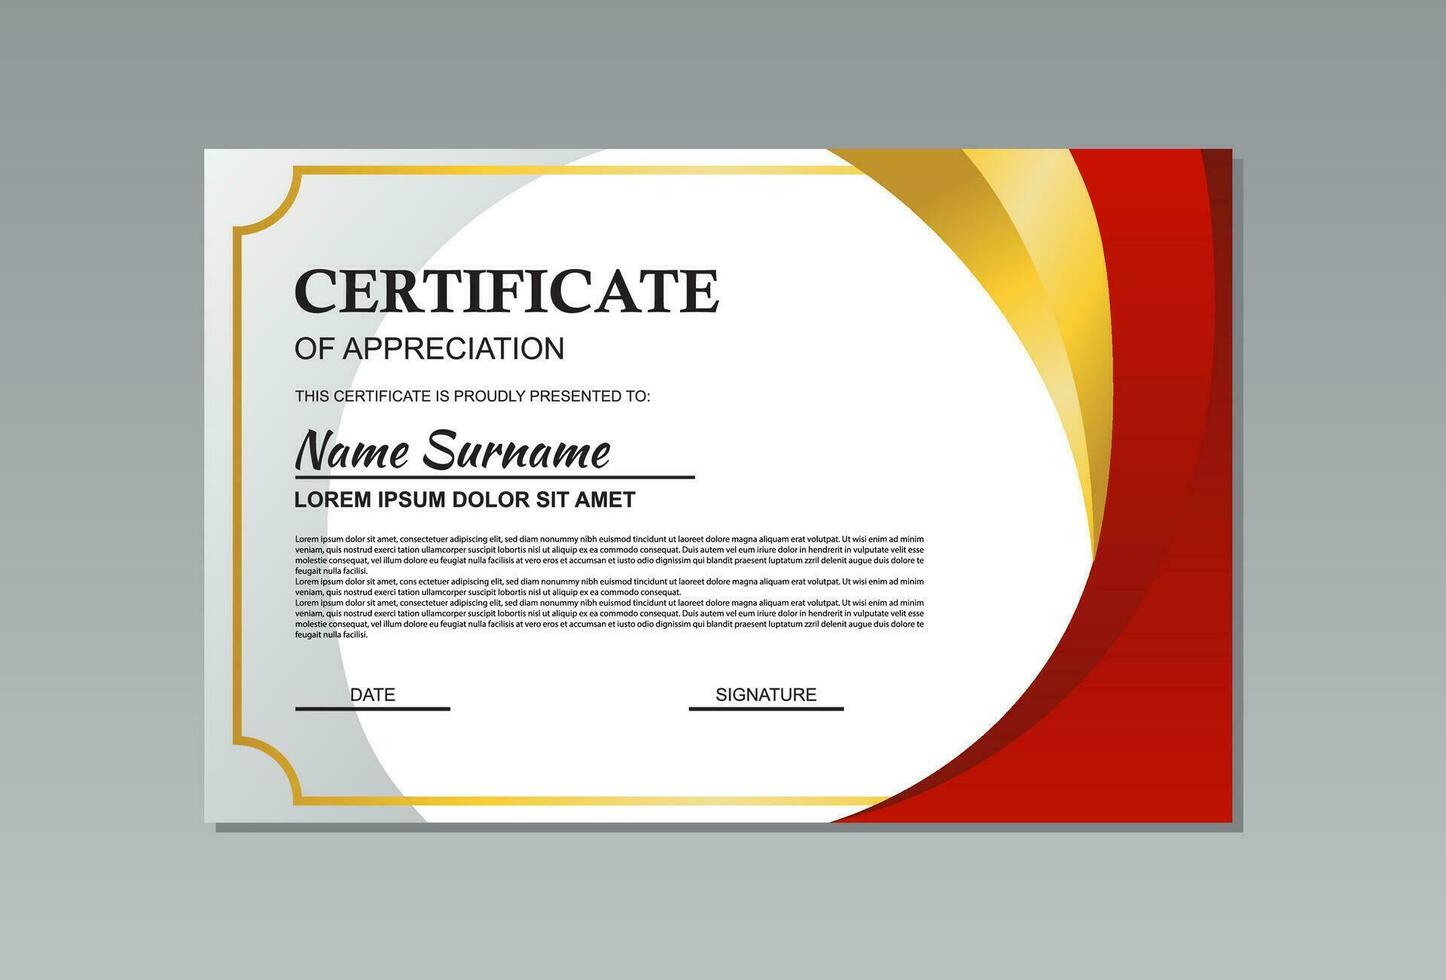 red and gold horizontal certificate template design in abstract style for appreciation. vector